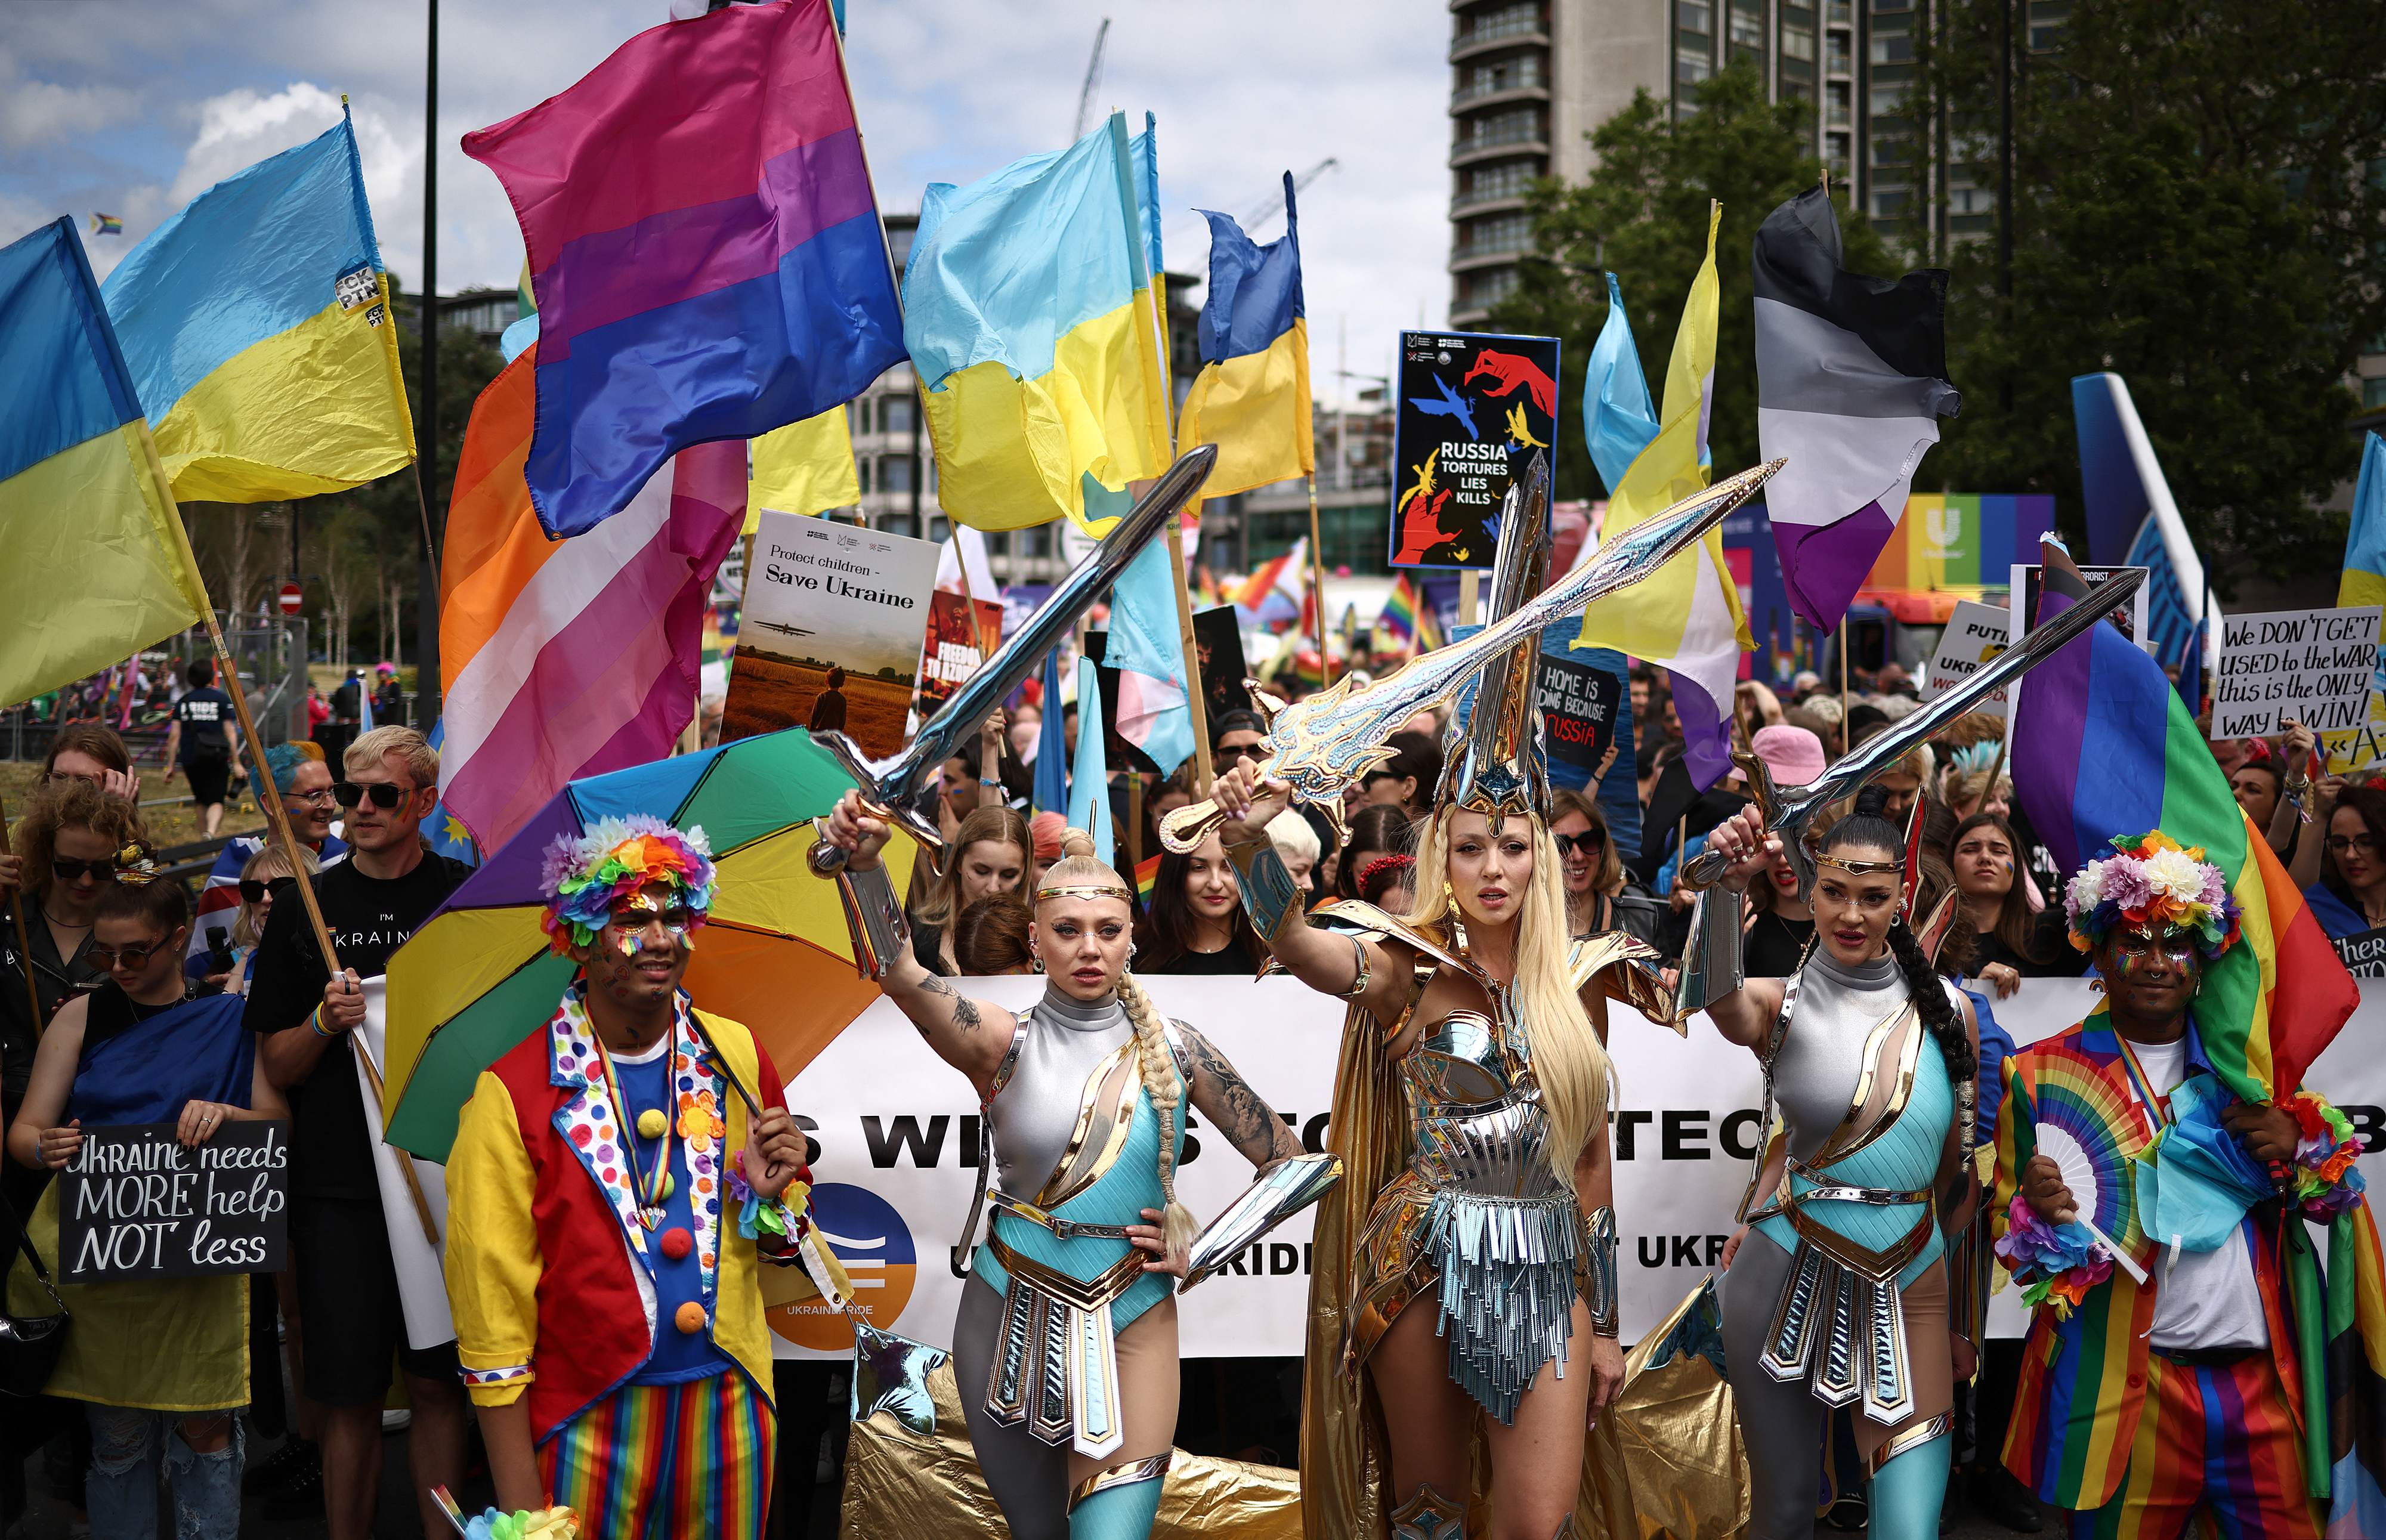 Members of the LGBT+ community take part in the annual Pride Parade in the streets of London